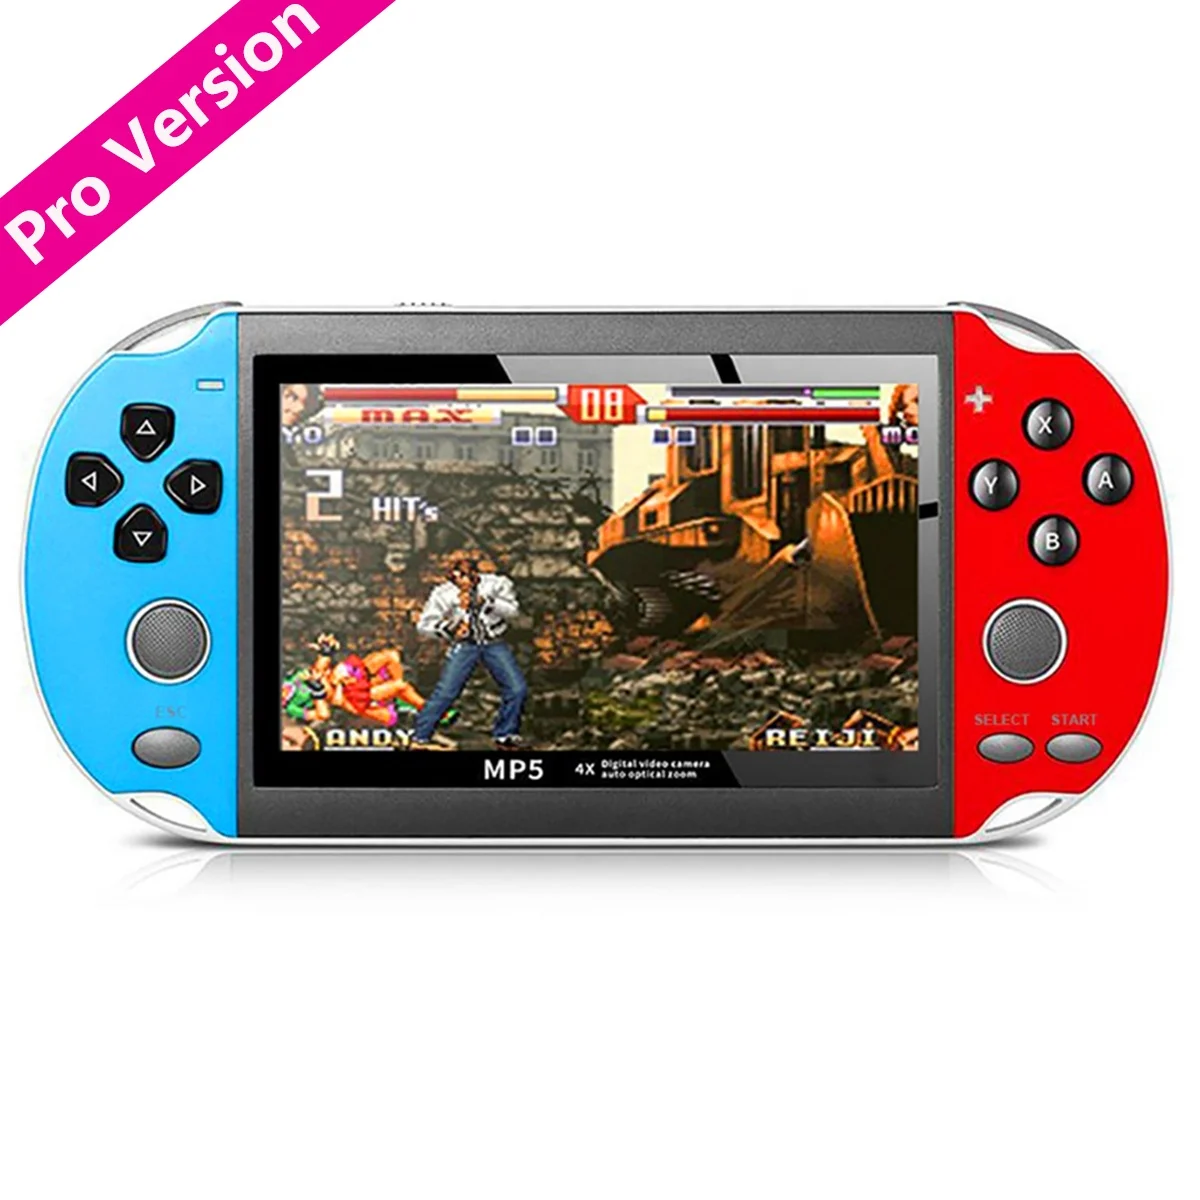 

Highest Quality Multi-Functional Portable X6 X7 X9 X12 X13 X15 Handheld Game Console 64/128 Bit Games Video Game Consoles, Blue red